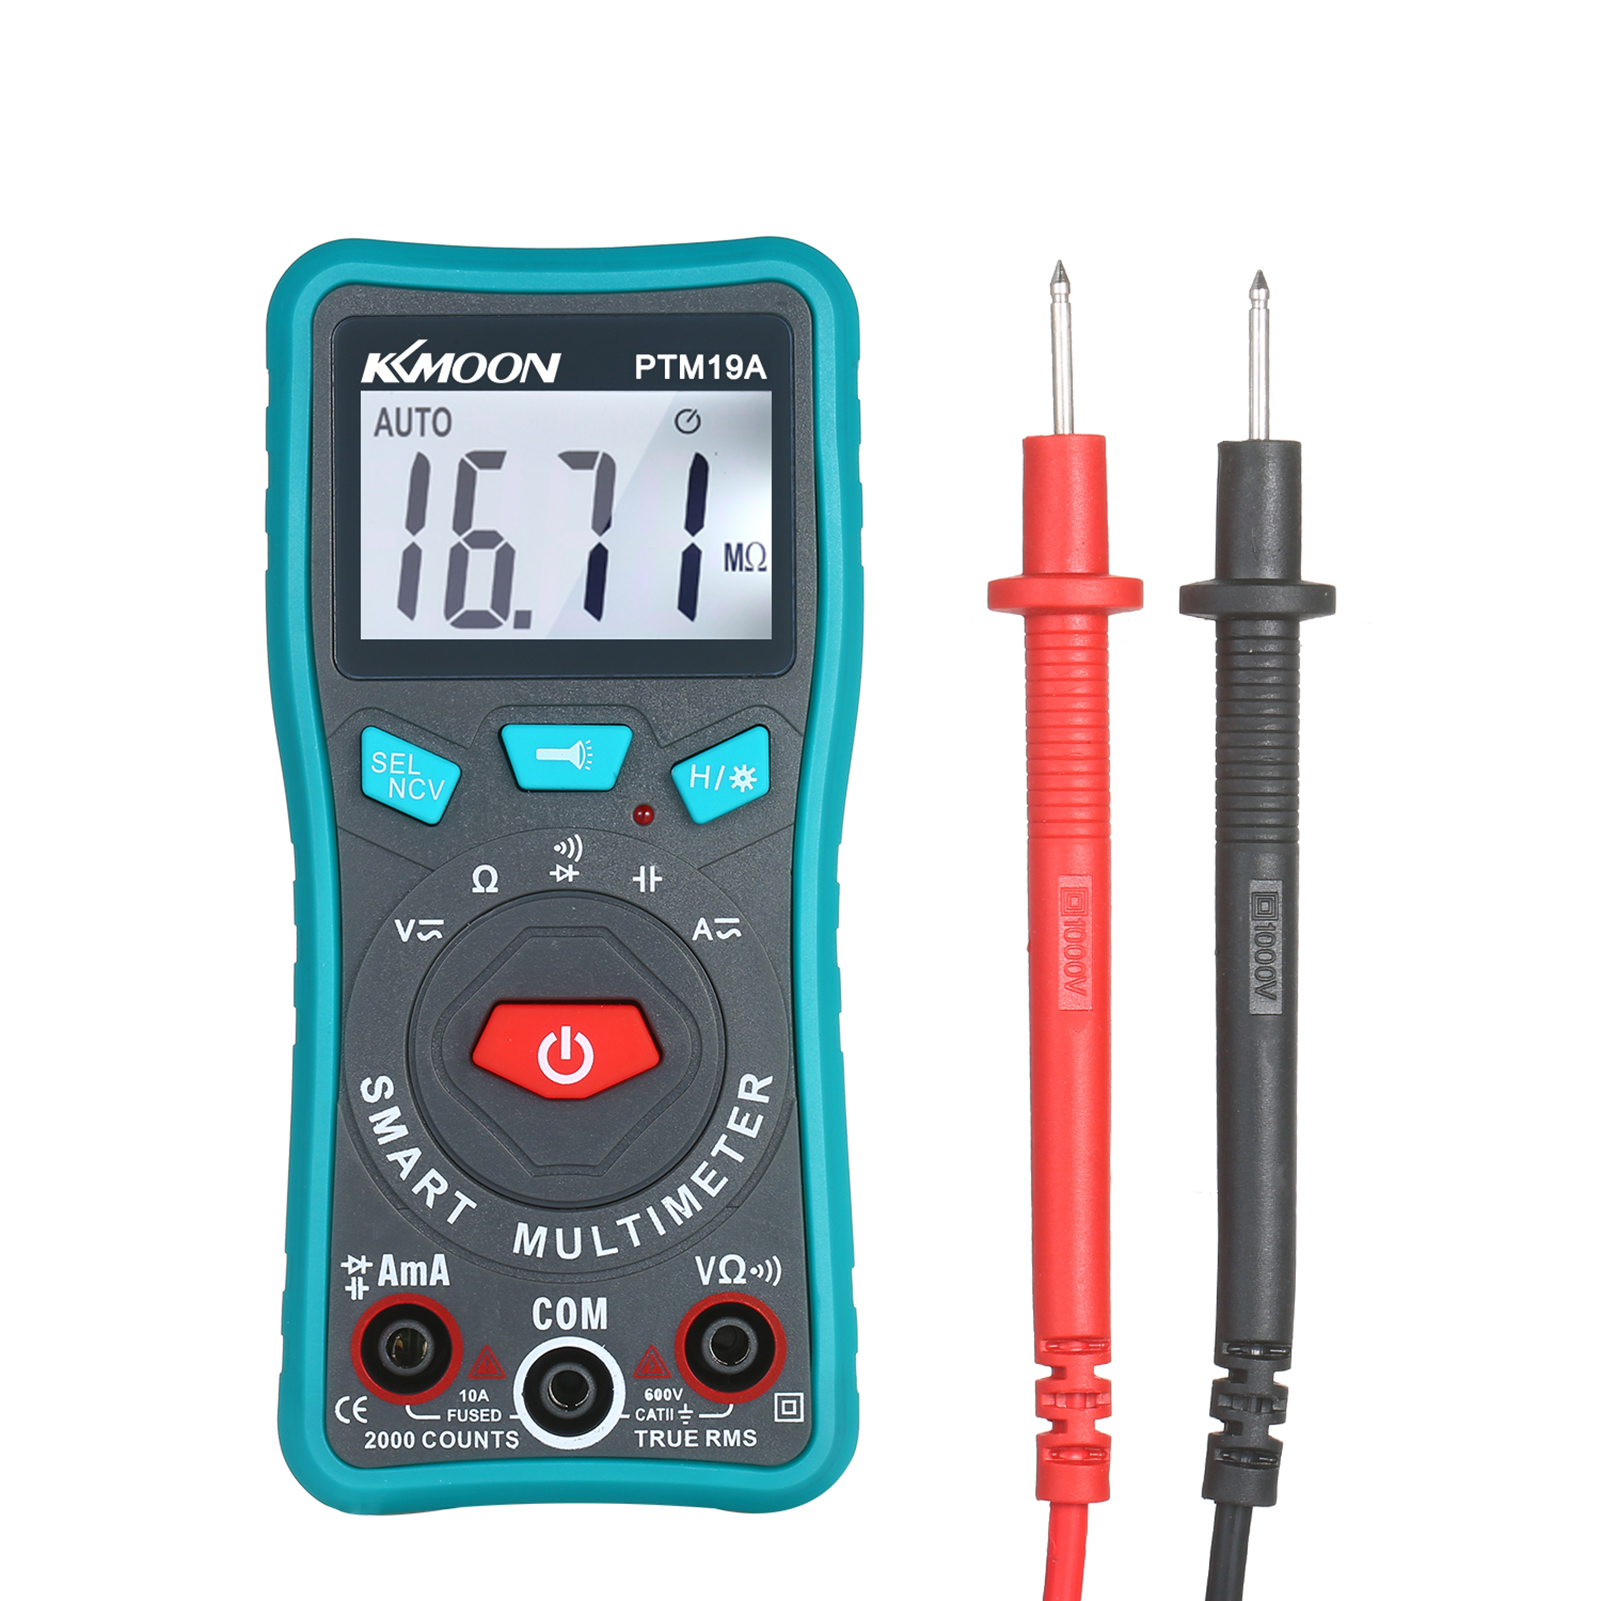 Triode Diode Handheld Current and Voltage Tester with LCD Display and Backlight for Measure AC,DC Voltage Resistance EECOO Digital Multimeter DC Current 